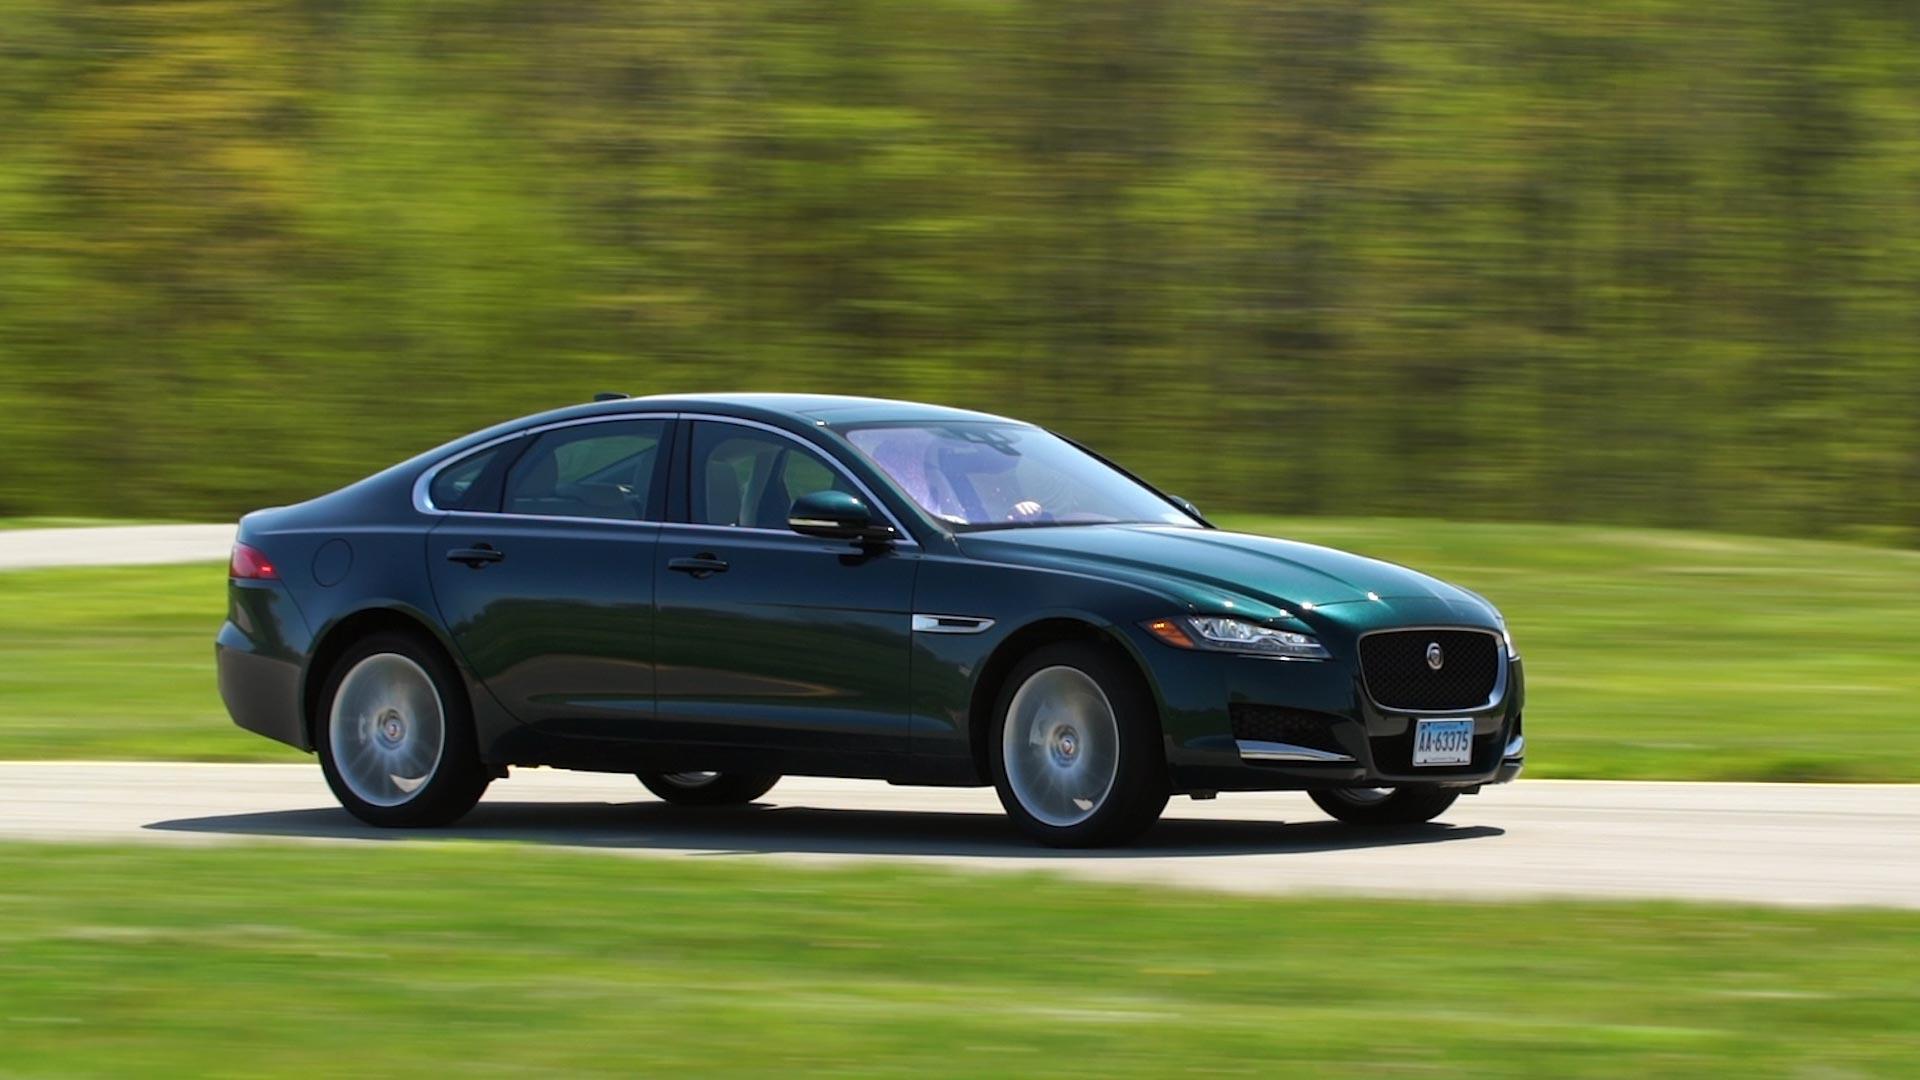 Athletic Jaguar XF Trails on Refinement - Consumer Reports